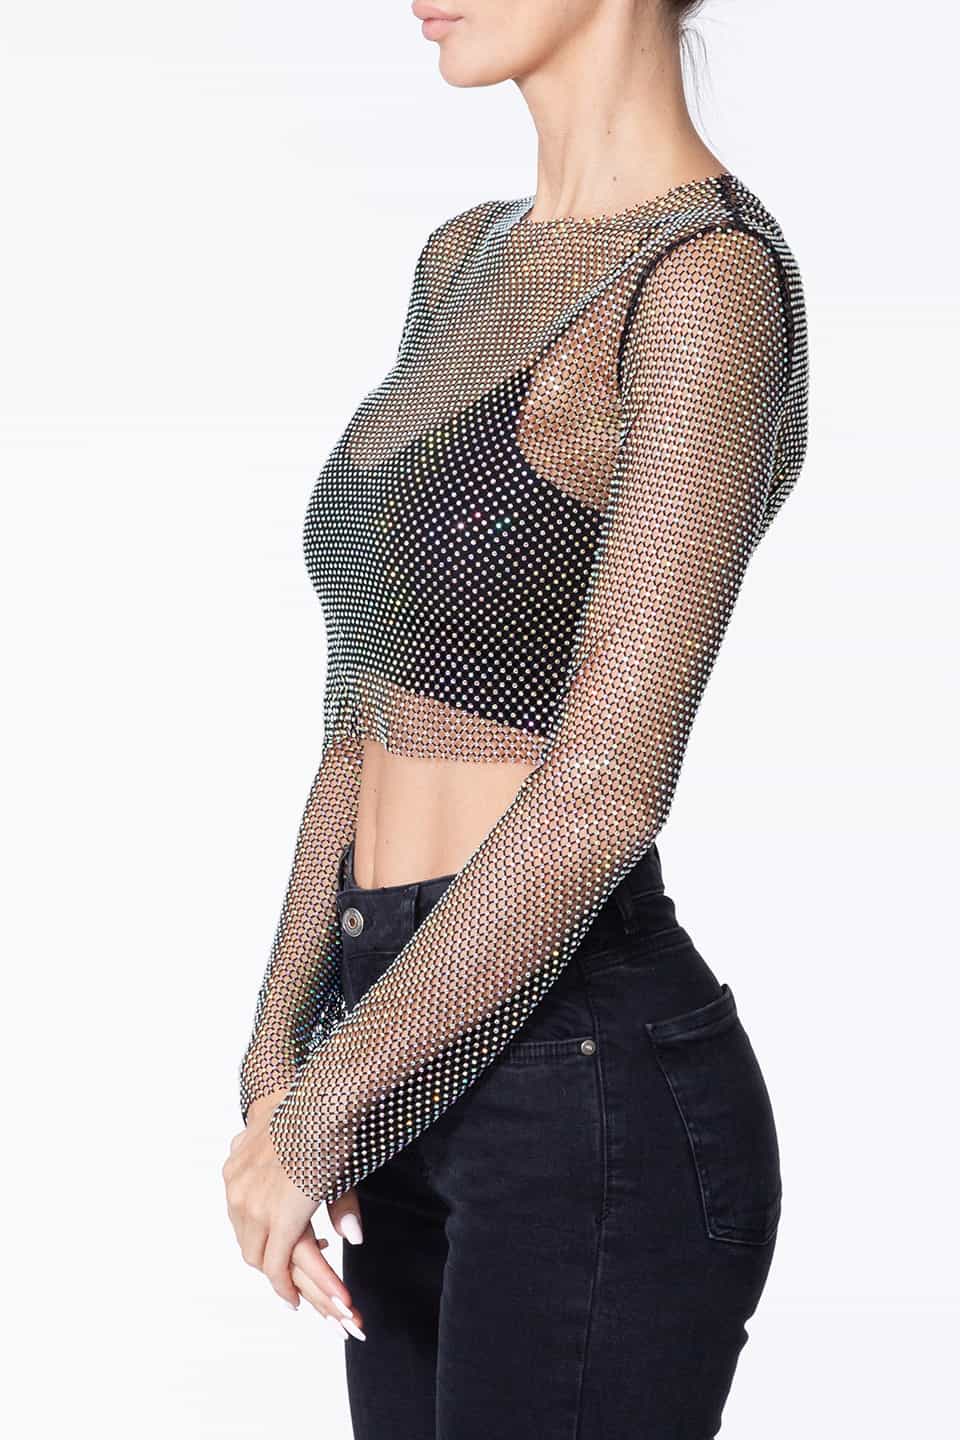 Thumbnail for Product gallery 4, Shop online fashion designer crop top in rhinestones